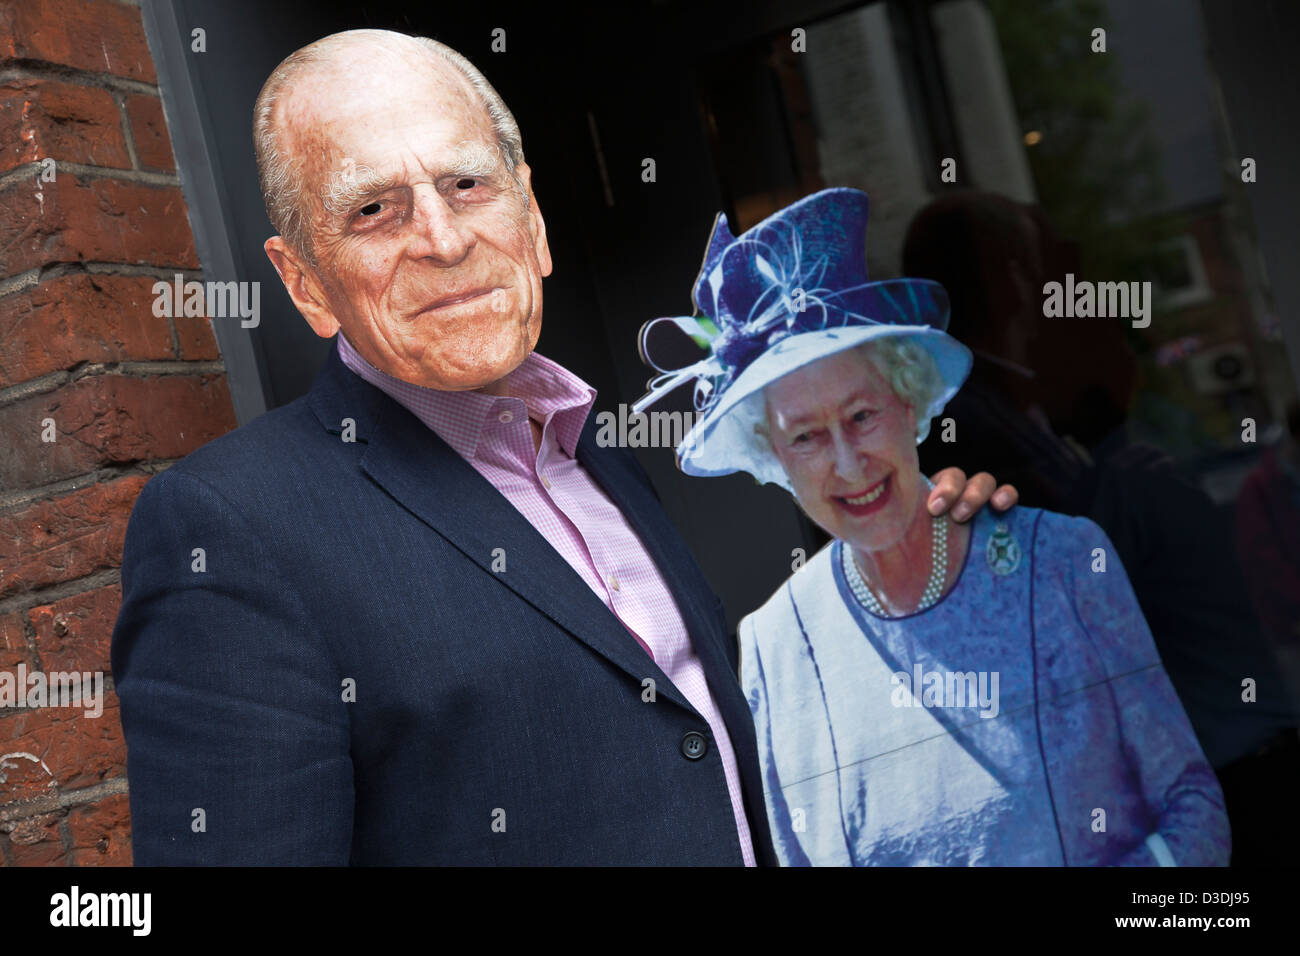 Cut out of Queen Elisabeth II and a man wearing Prince Philip mask in a Chiswick restaurant, London, UK Stock Photo